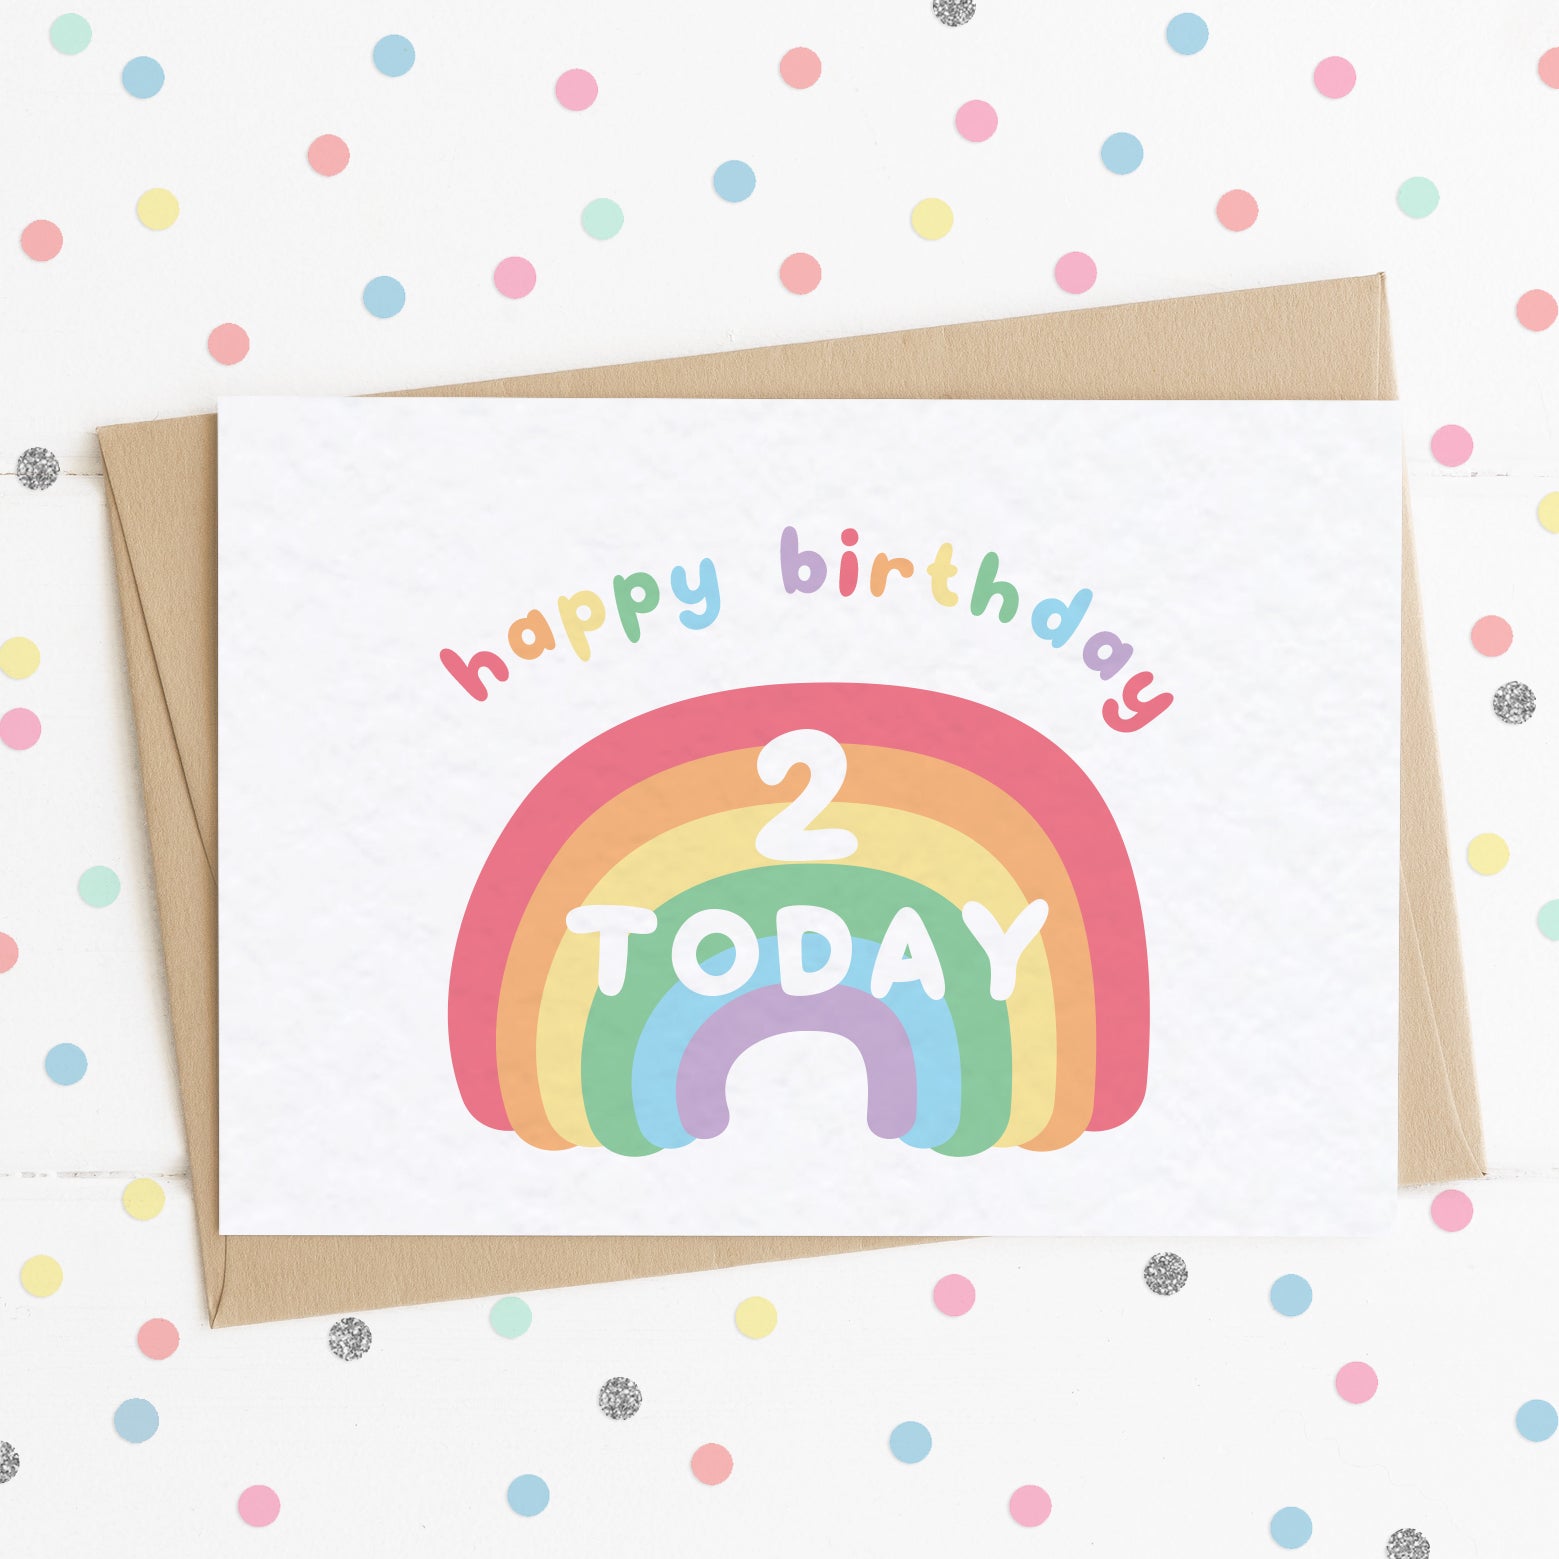 A cute milestone age birthday card with a smiling happy rainbow on it and the message "HAPPY BIRTHDAY - 2 TODAY".